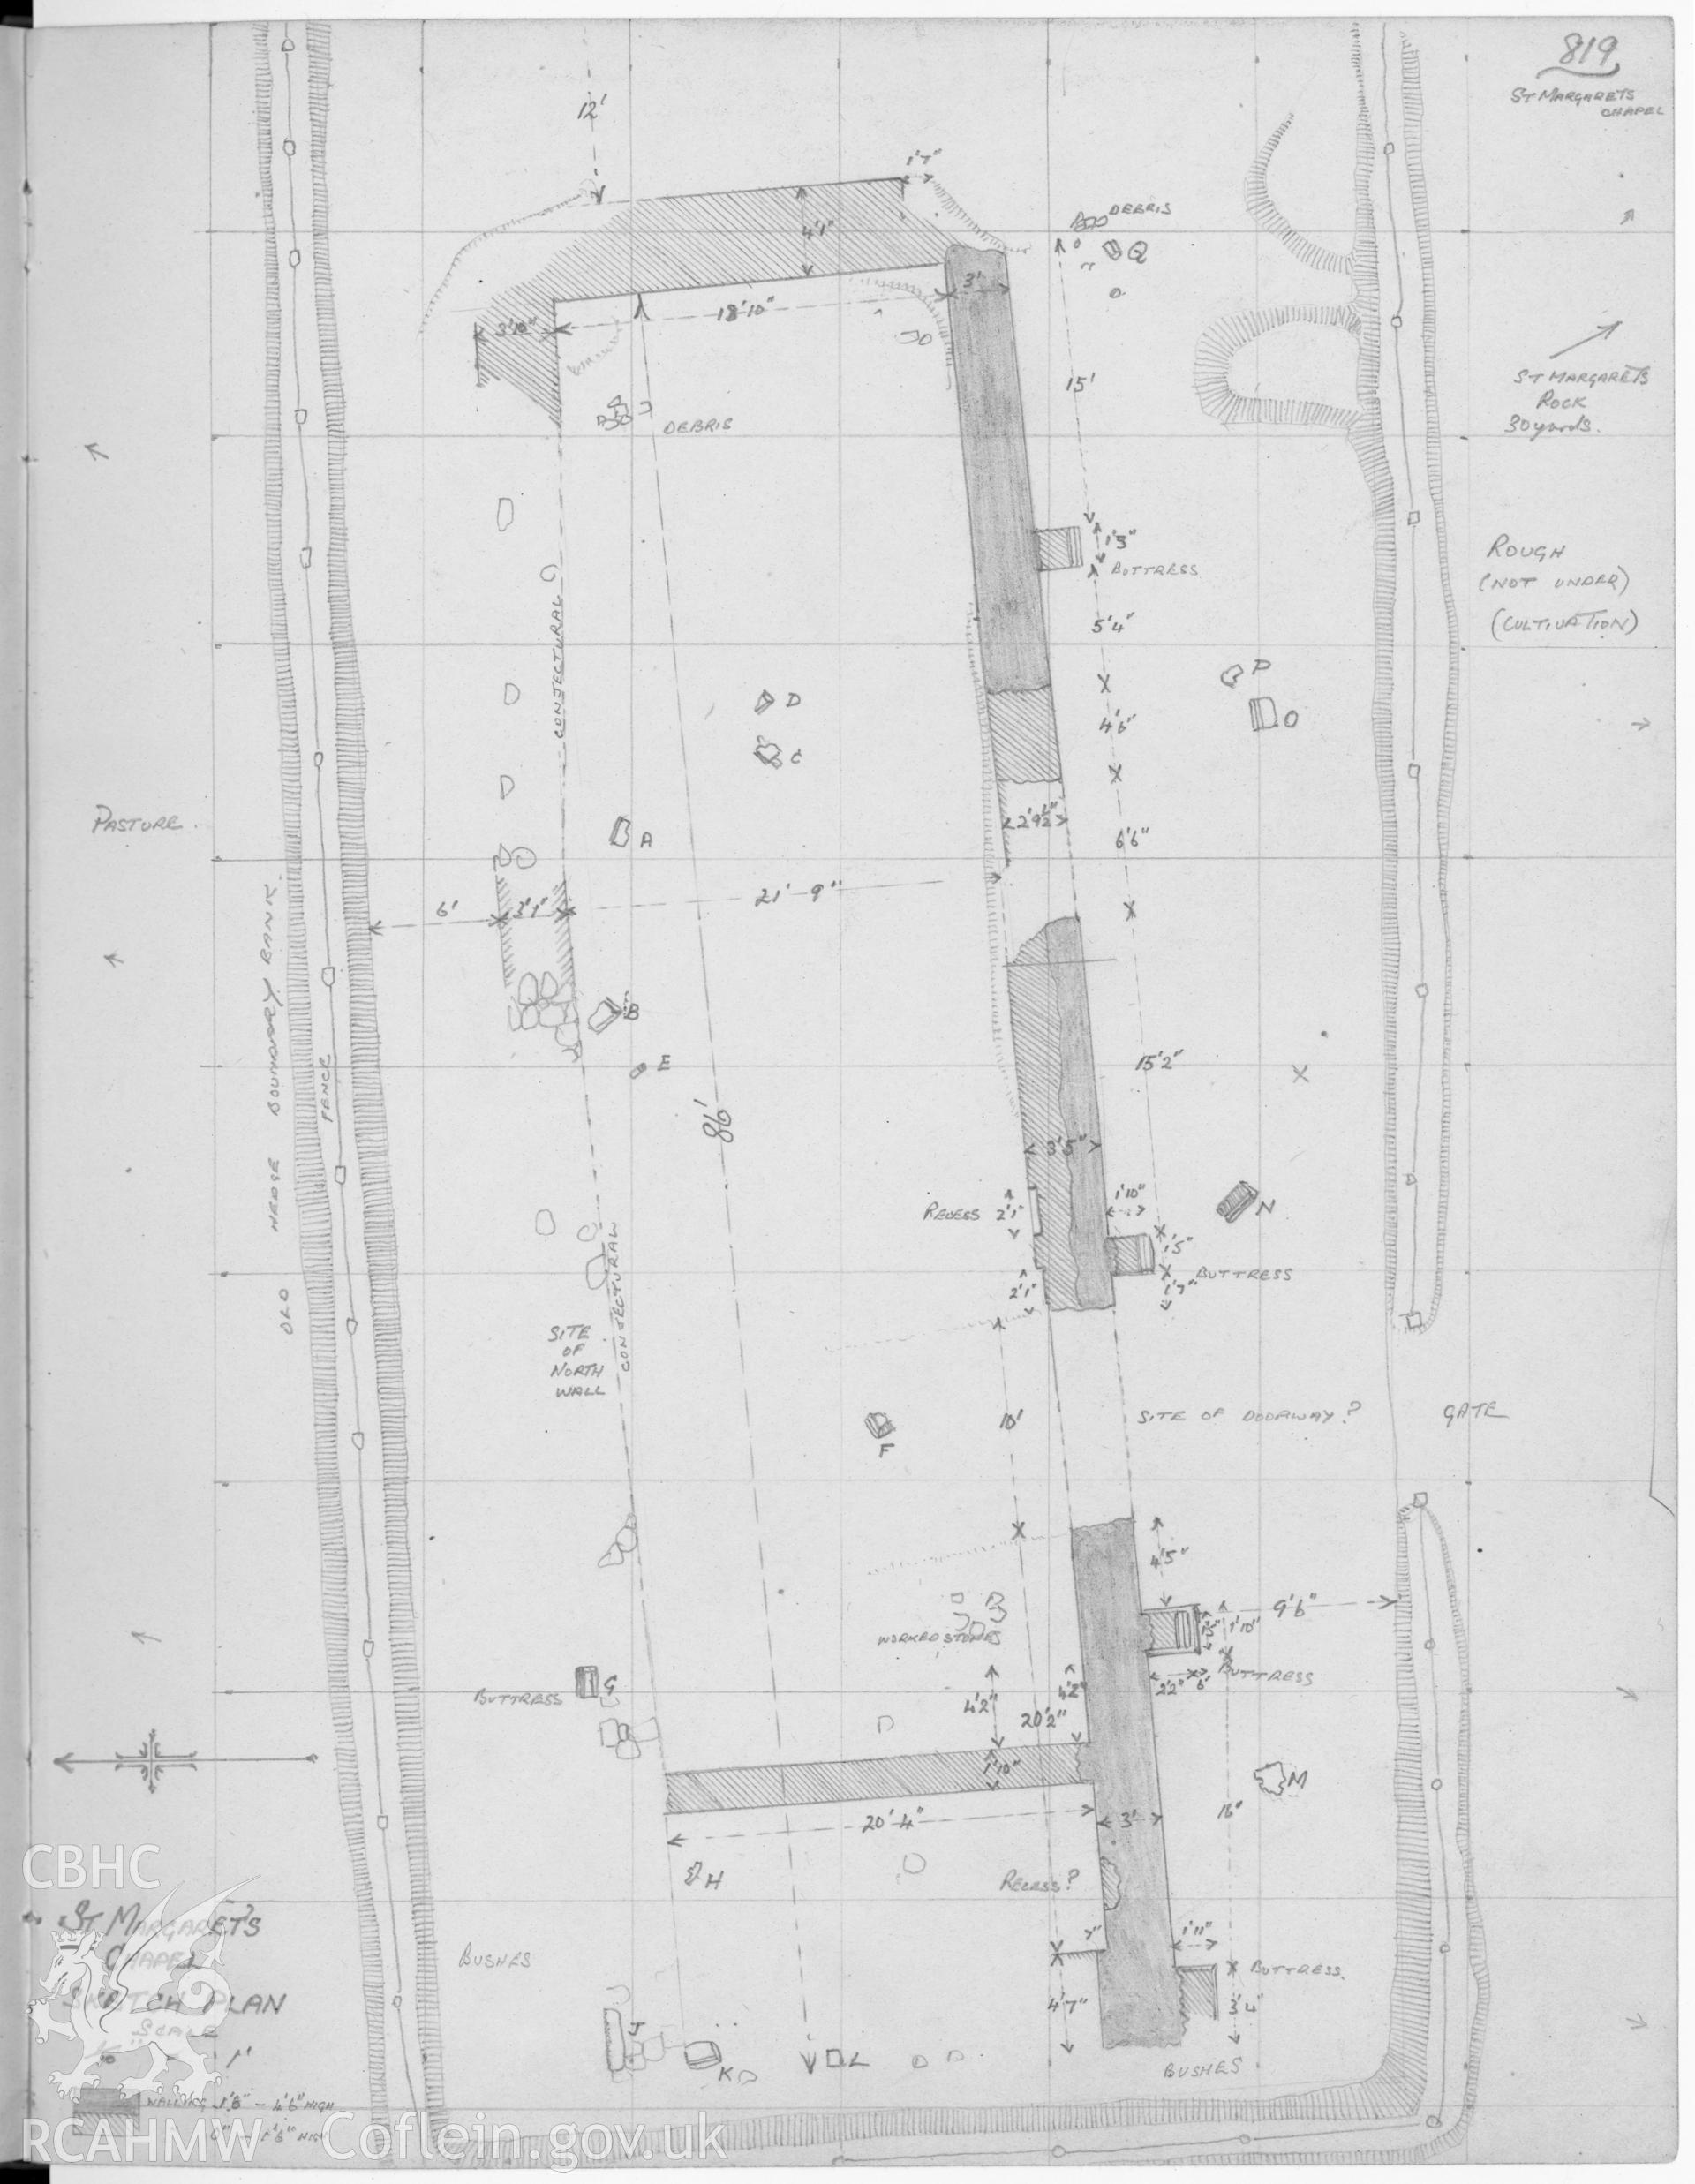 Pencil sketch plan of St Margaret's Chaepl, produced by Richard Kay.